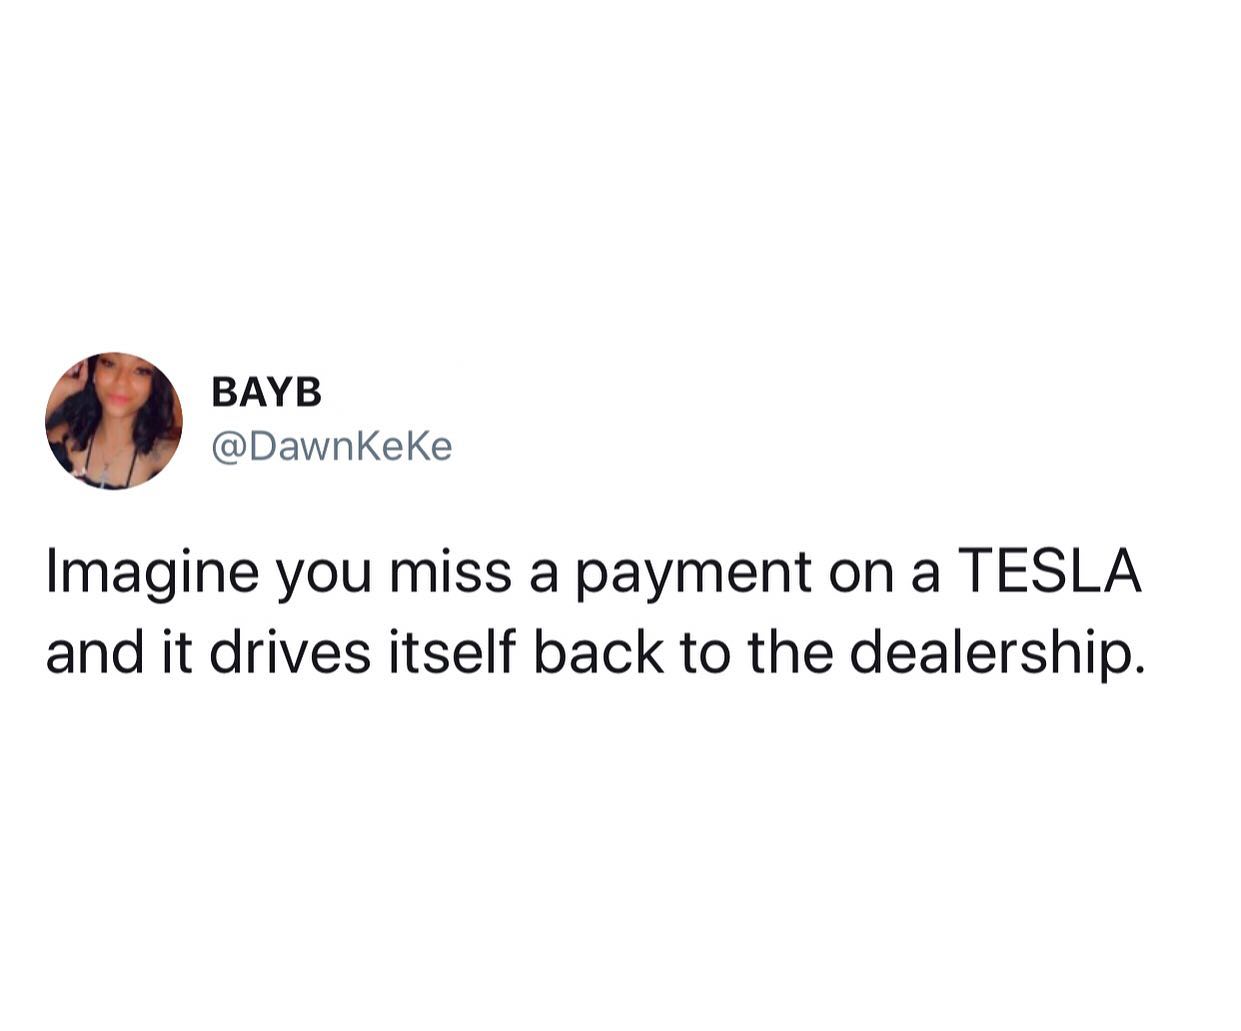 Imagine you miss a payment on a TESLA and it drives itself back to the dealership.